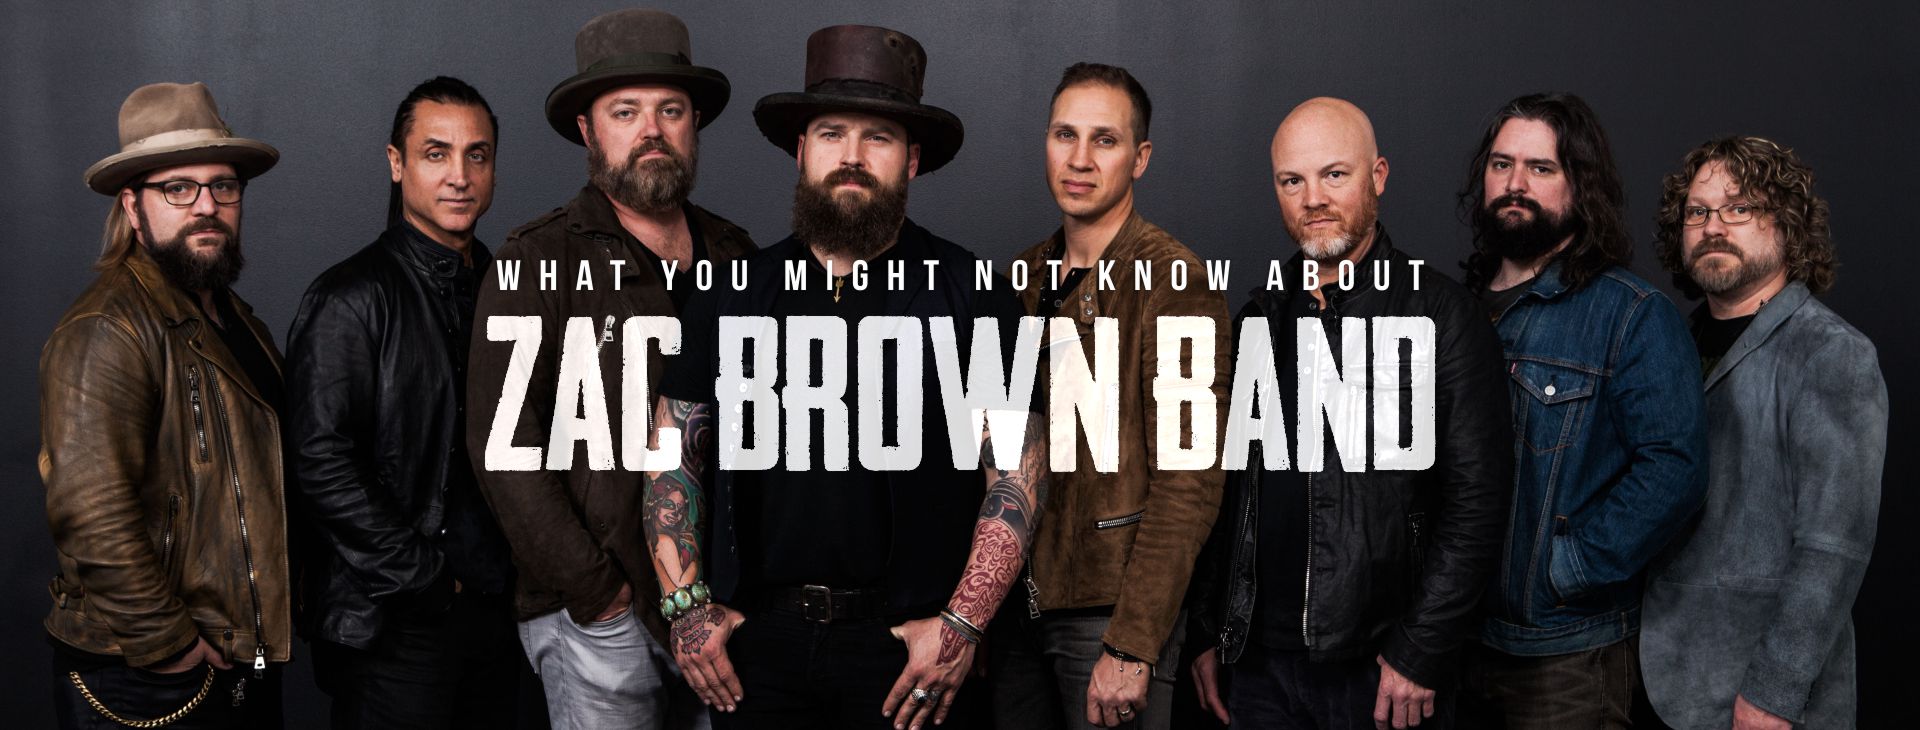 Things You May Not Know About Zac Brown Band. Carolina Country Music Fest